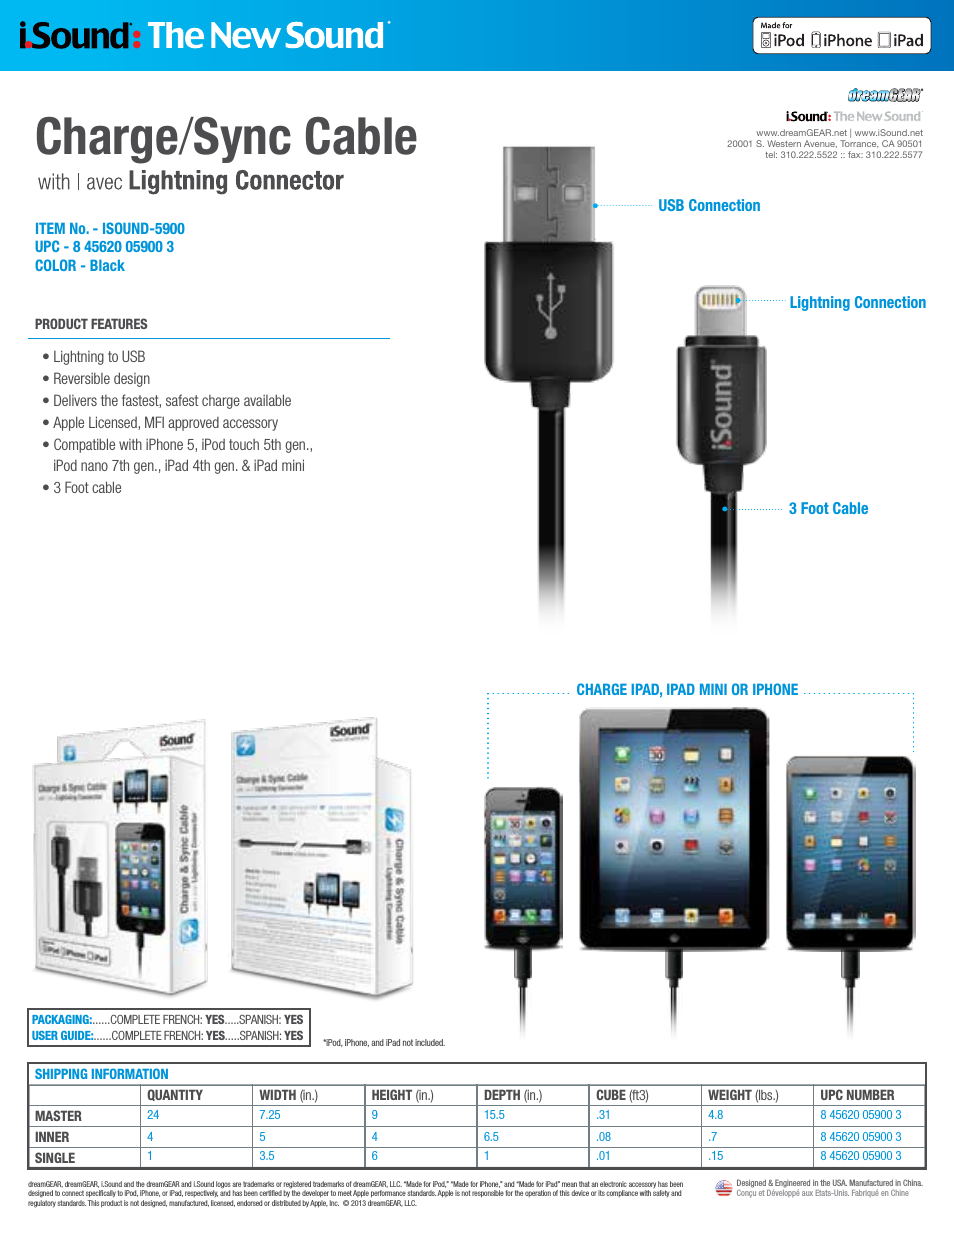 Charge & Sync Cable with Lightning Connector 5900 - Sell Sheet